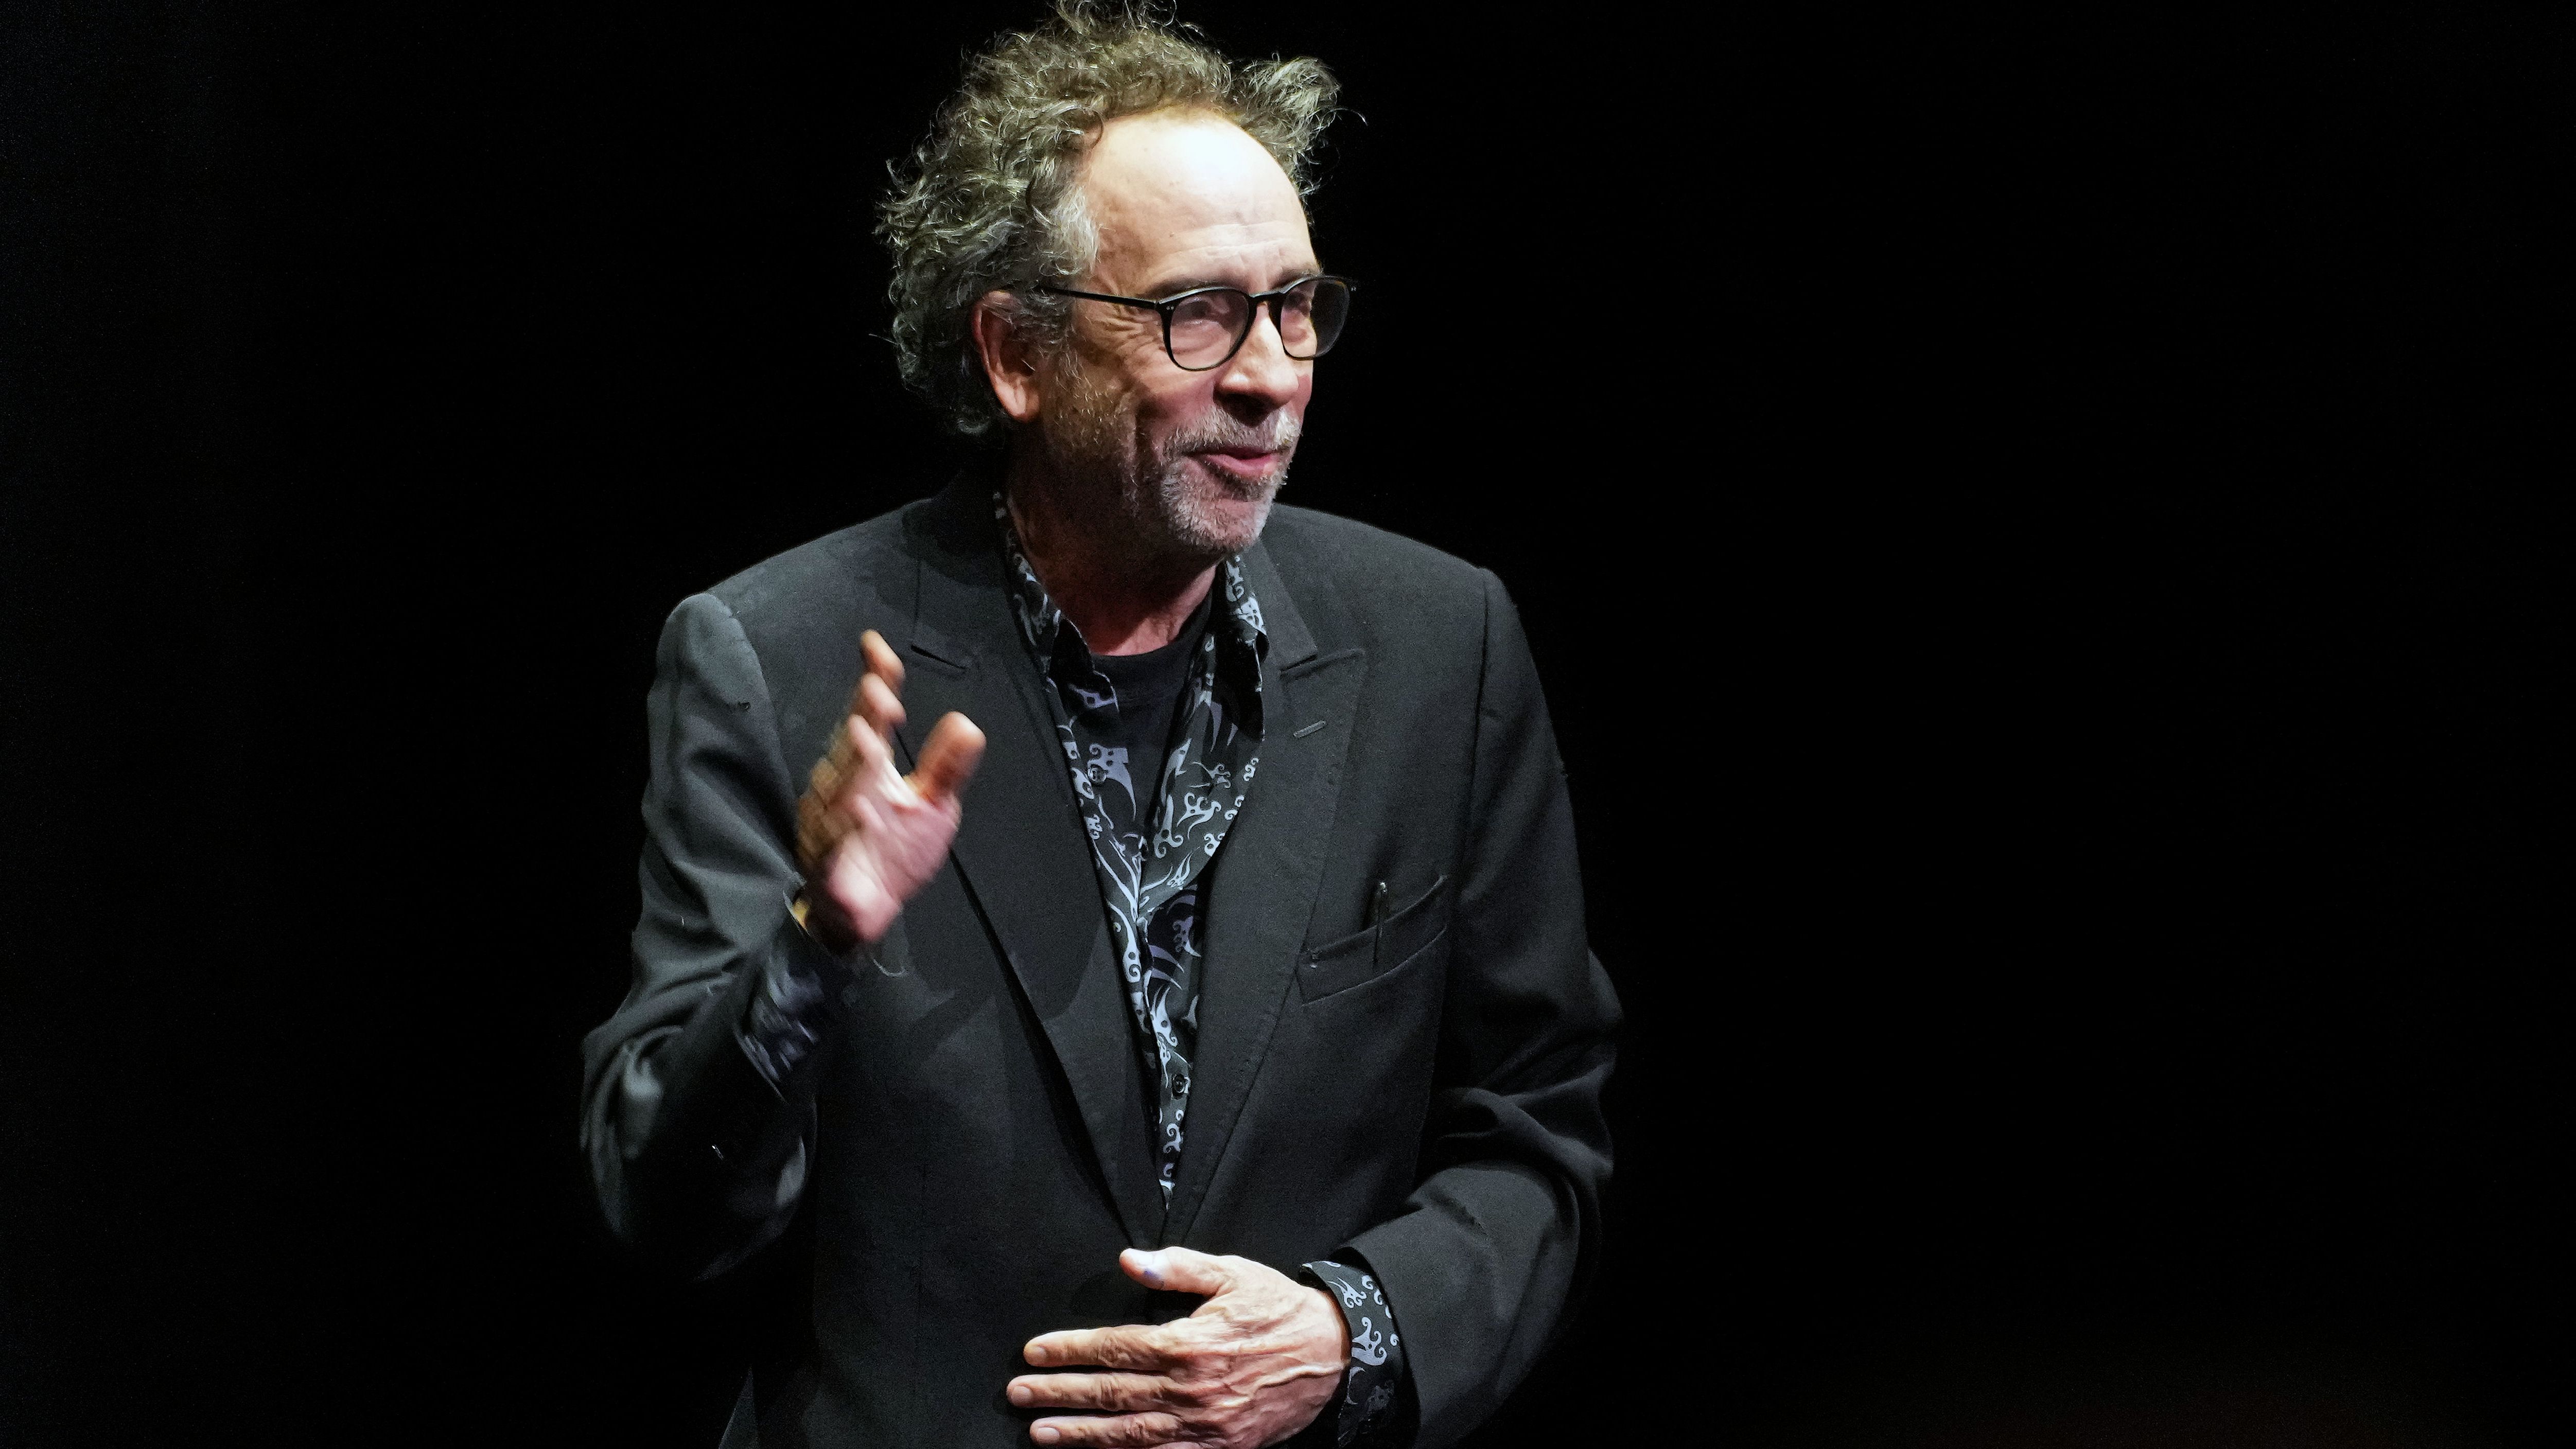 Tim Burton appears onstage during his Master Class during the 14th Film Festival Lumiere on October 21, 2022 in Lyon, France.